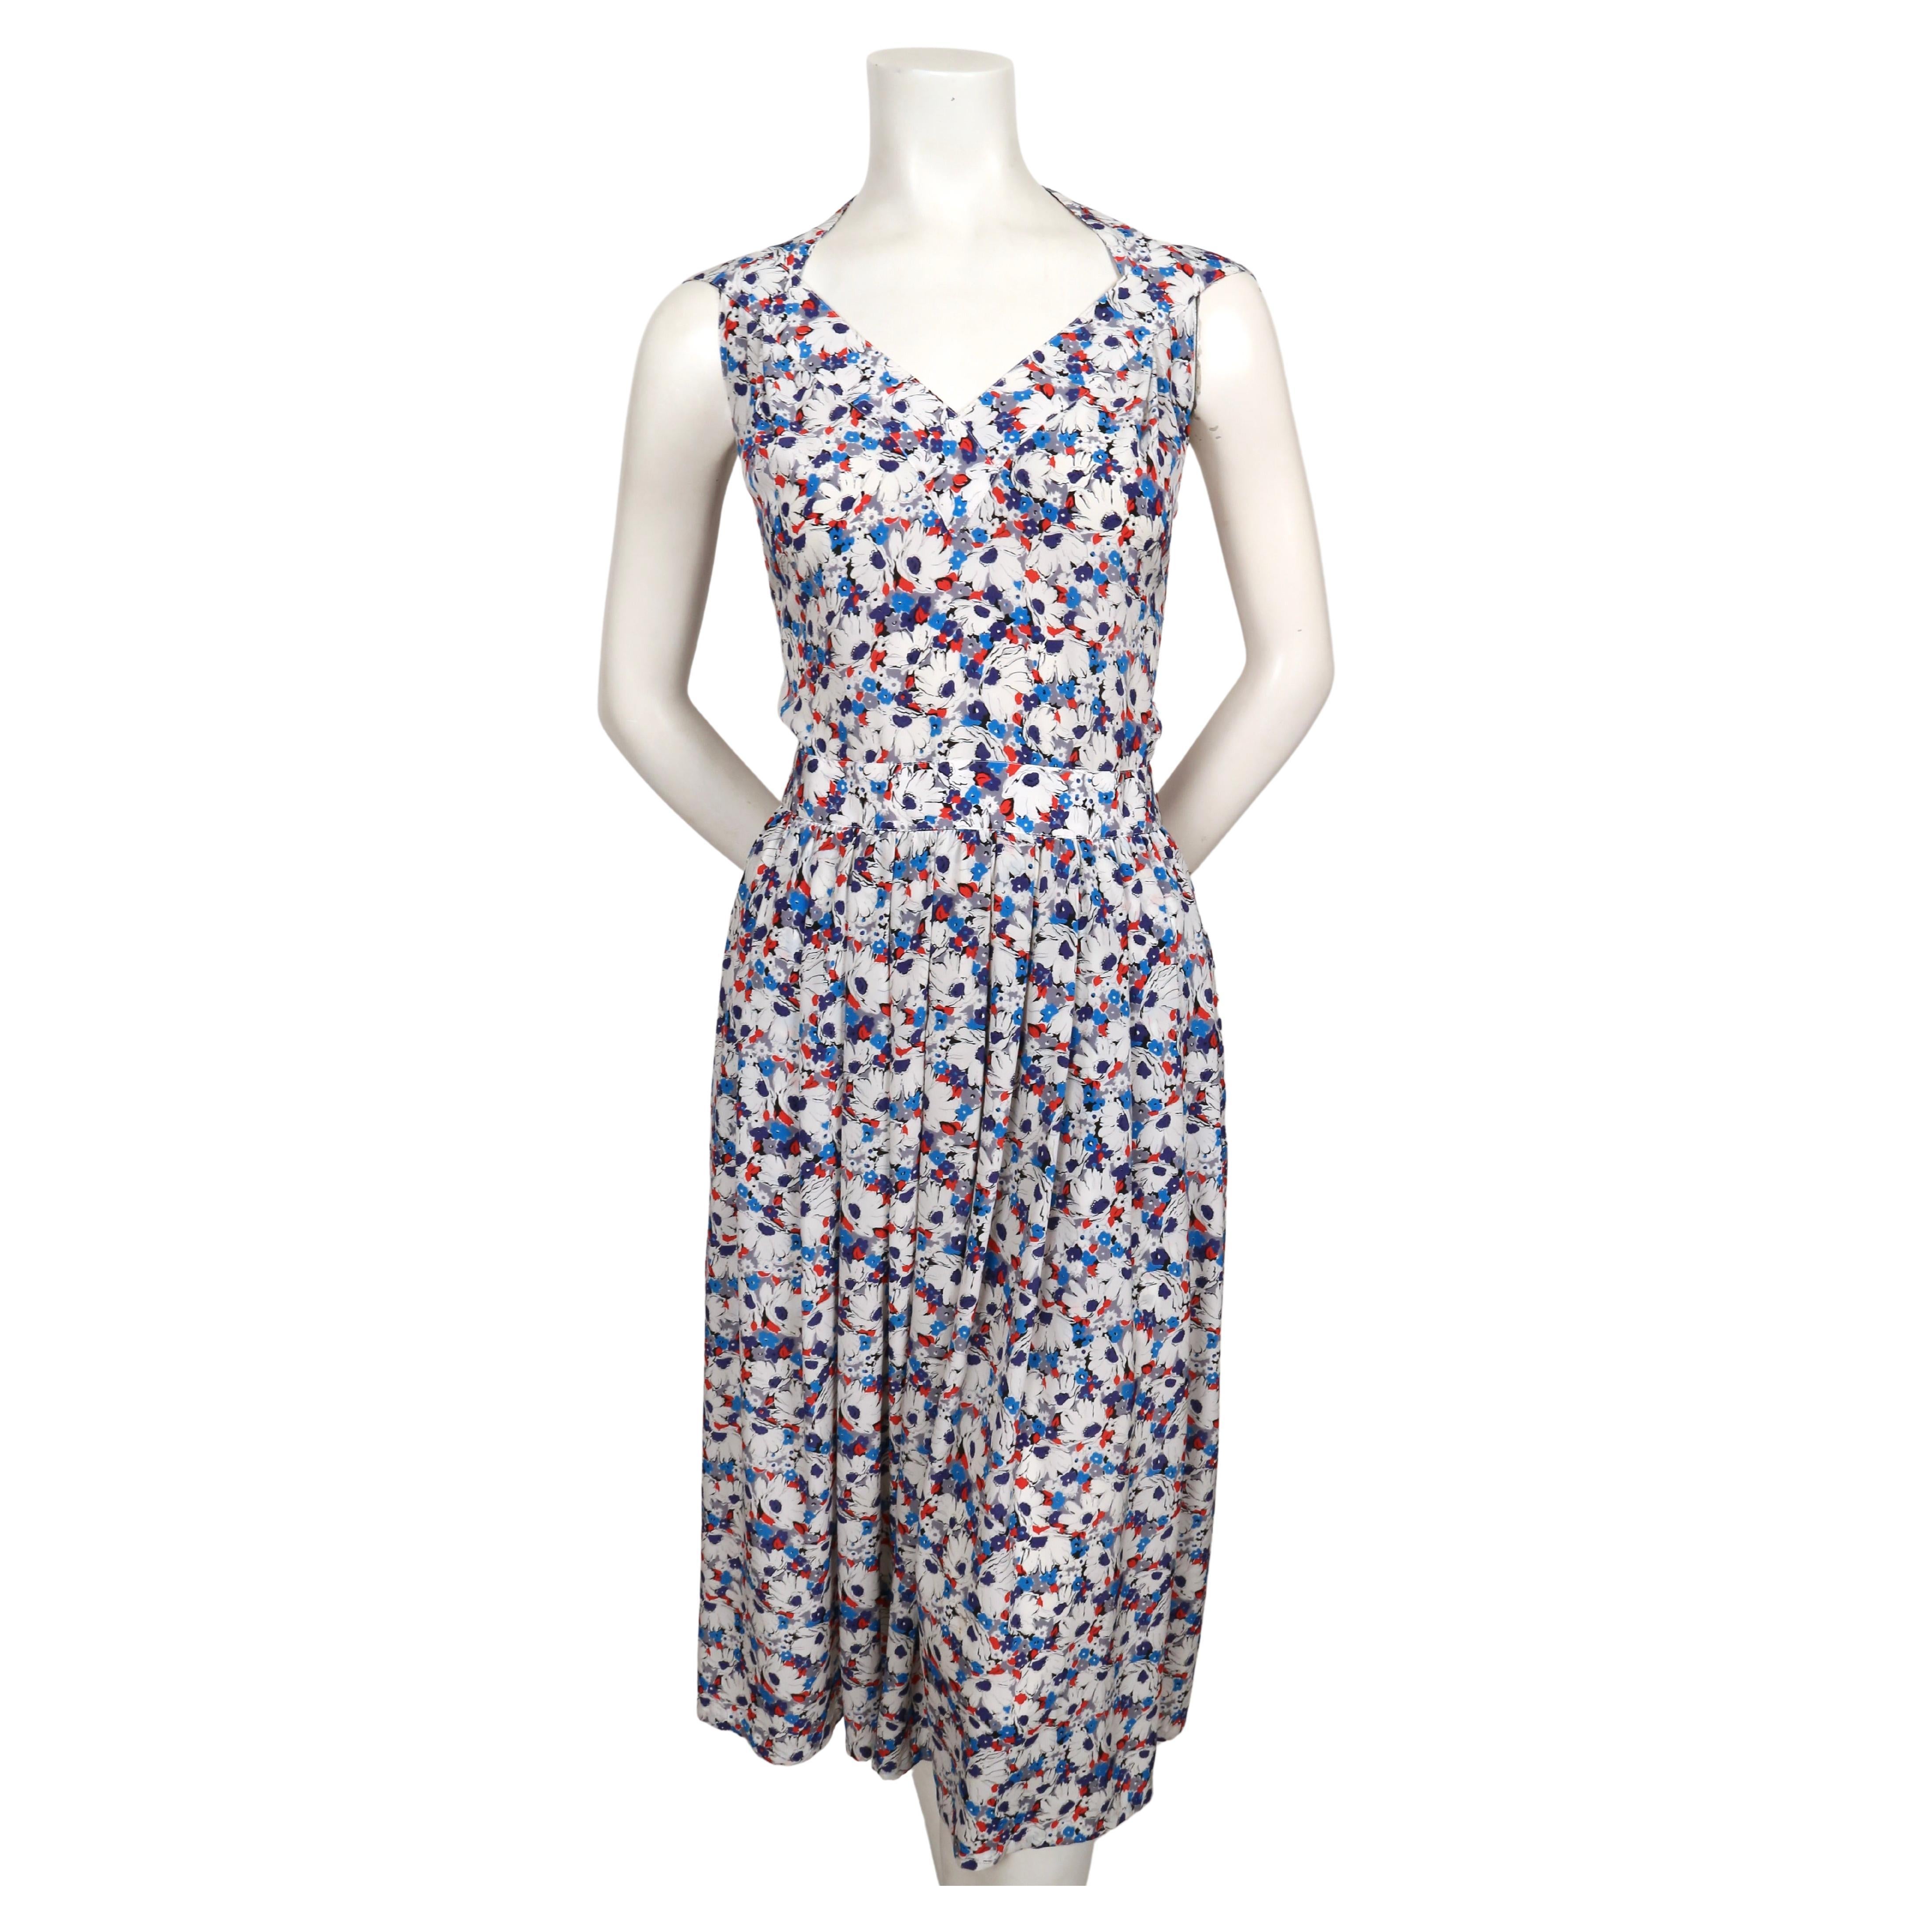 Silk, floral-printed dress with button closure and unique straps from Lanvin dating to the late 1980's, early 1990's. French size 38. Approximate measurements: bust 33.5-34